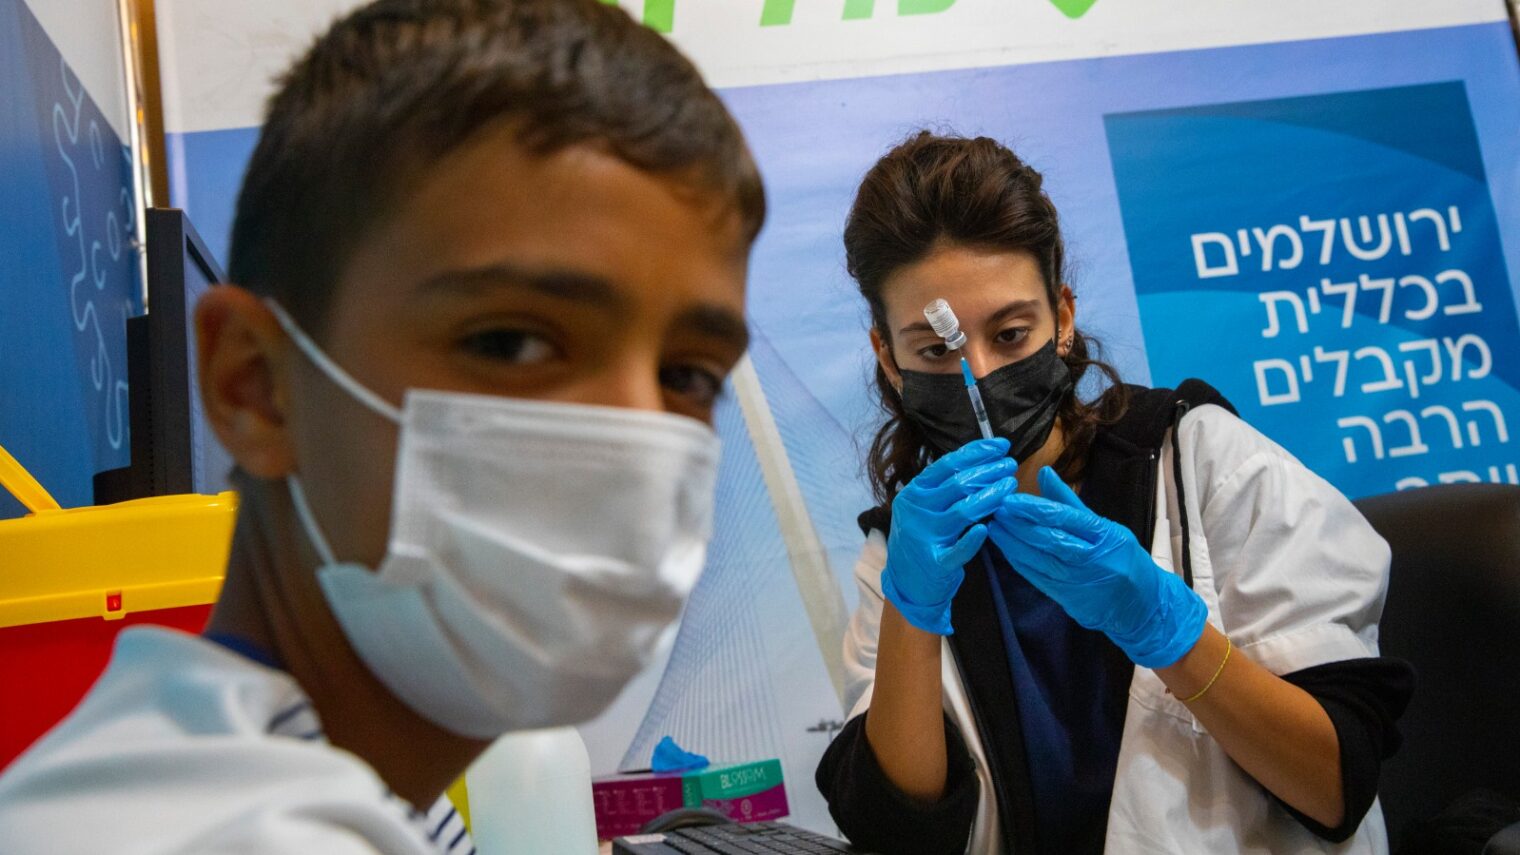 An Israeli boy receiving the Covid-19 vaccine in Jerusalem on September 20, 2021. Photo by Olivier Fitoussi/Flash90